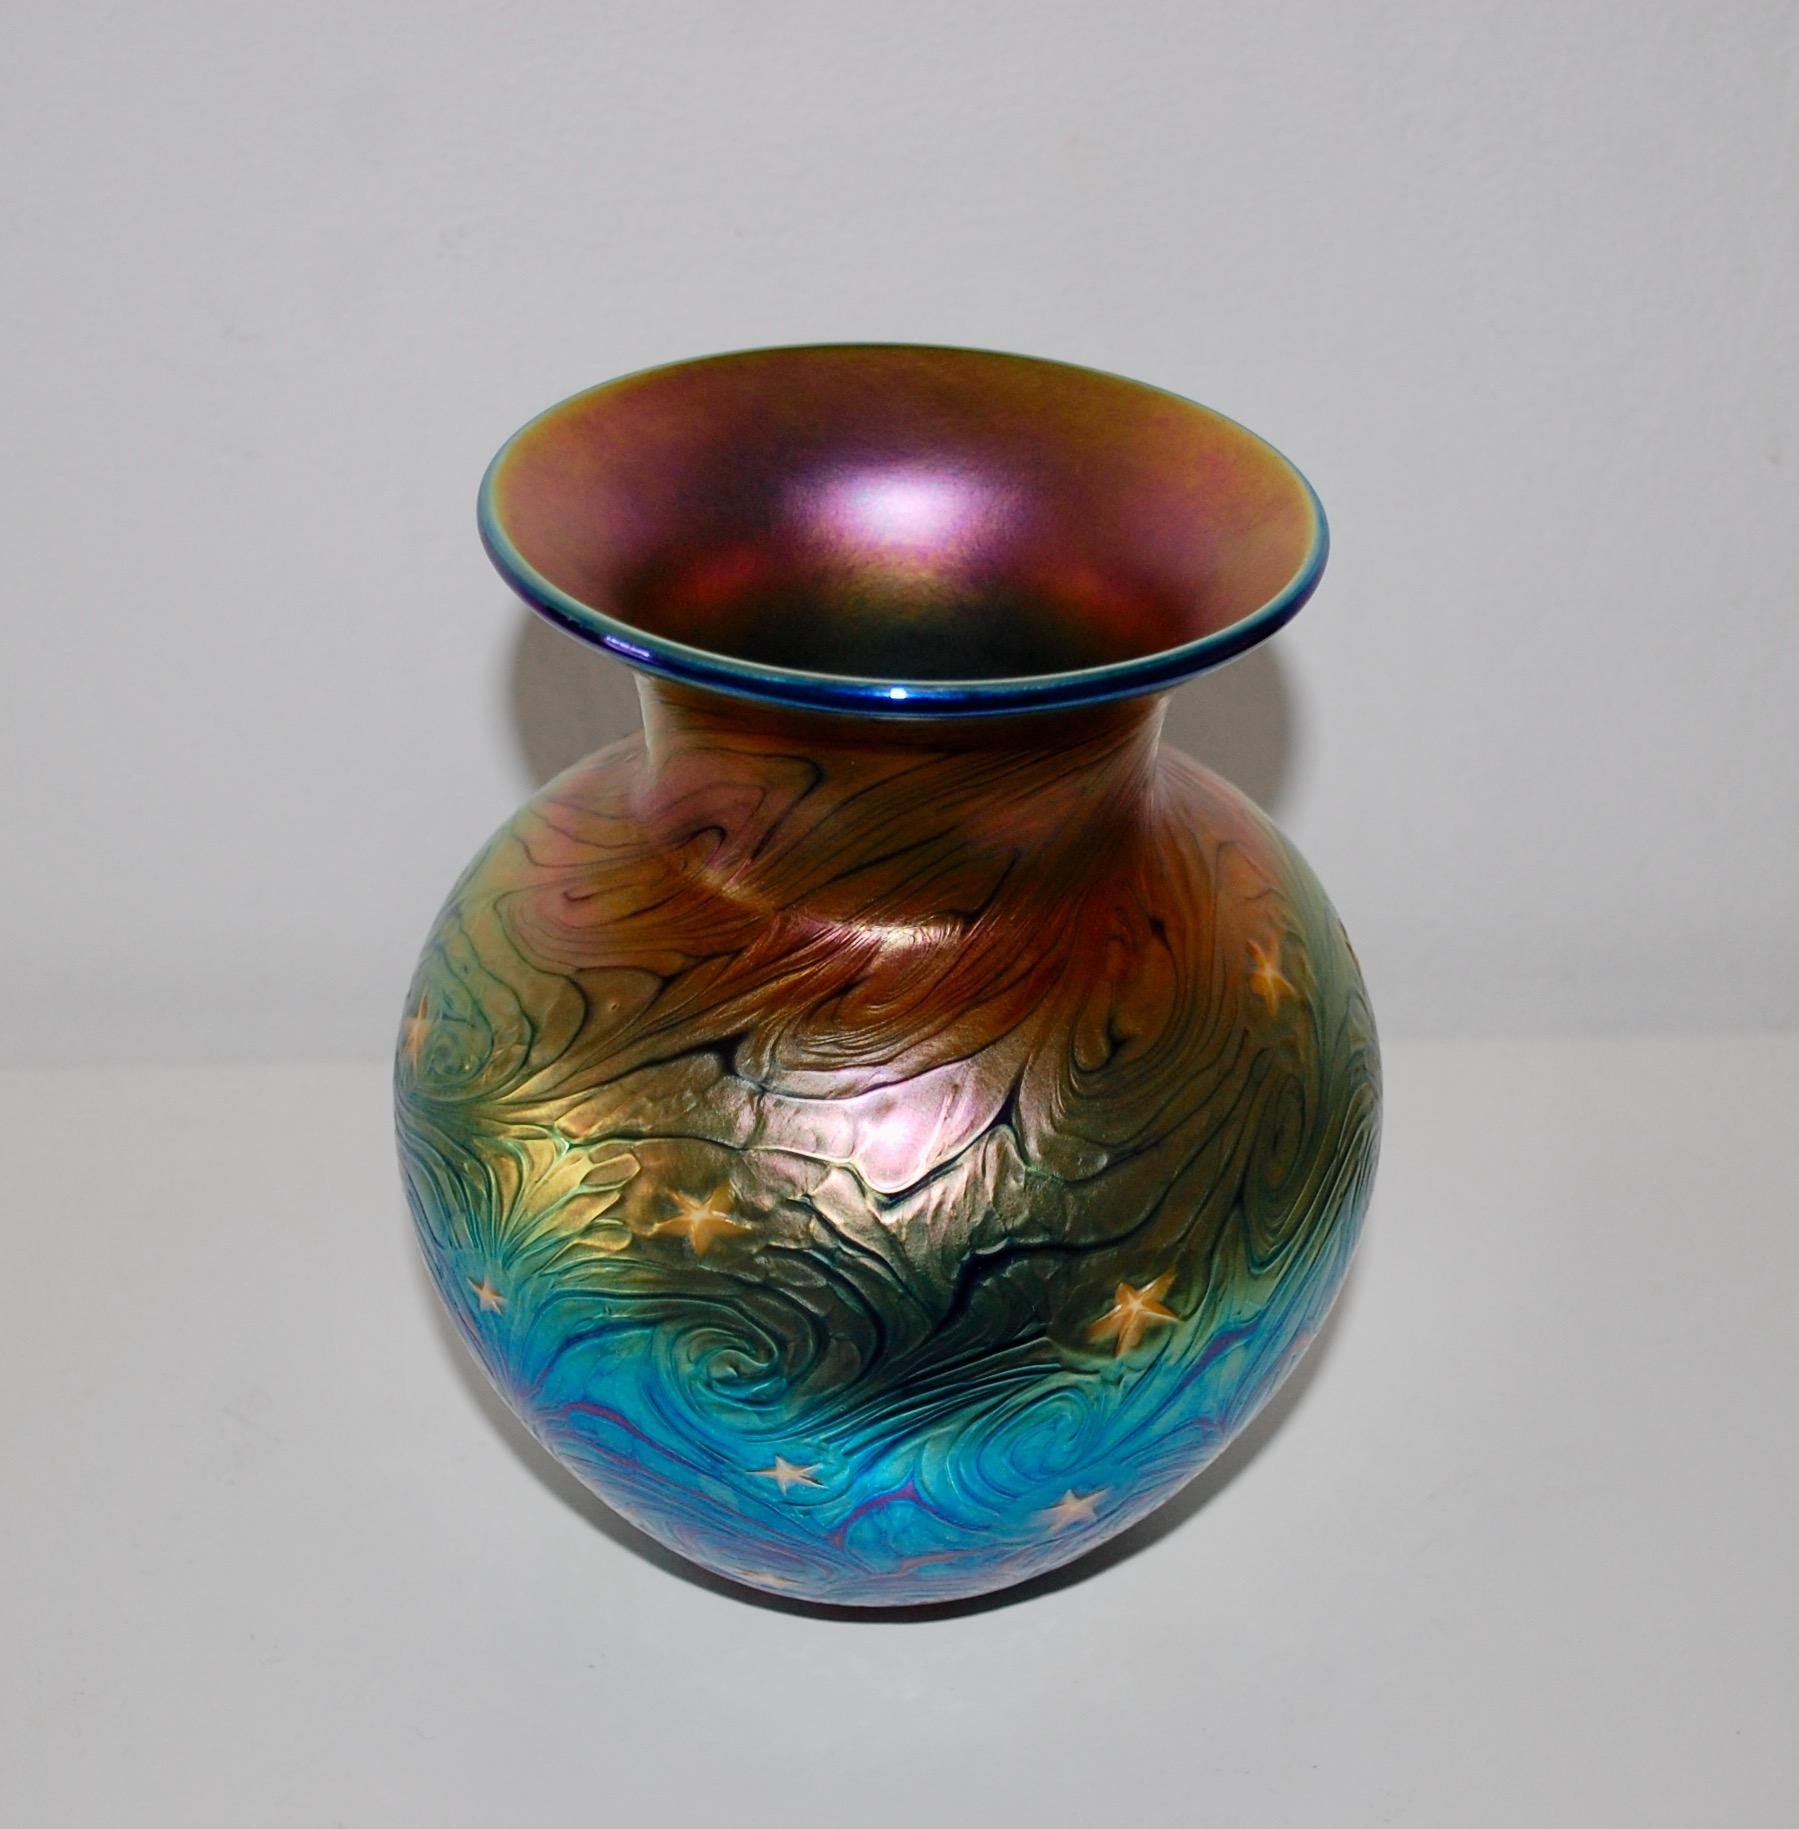 Lundberg Studios Contemporary Art Glass Vase.
Every piece of glass that bears the Lundberg Studios signature represents the finest in contemporary art glass. Crafted by master glass blowers, traditional and modern techniques are integrated to create